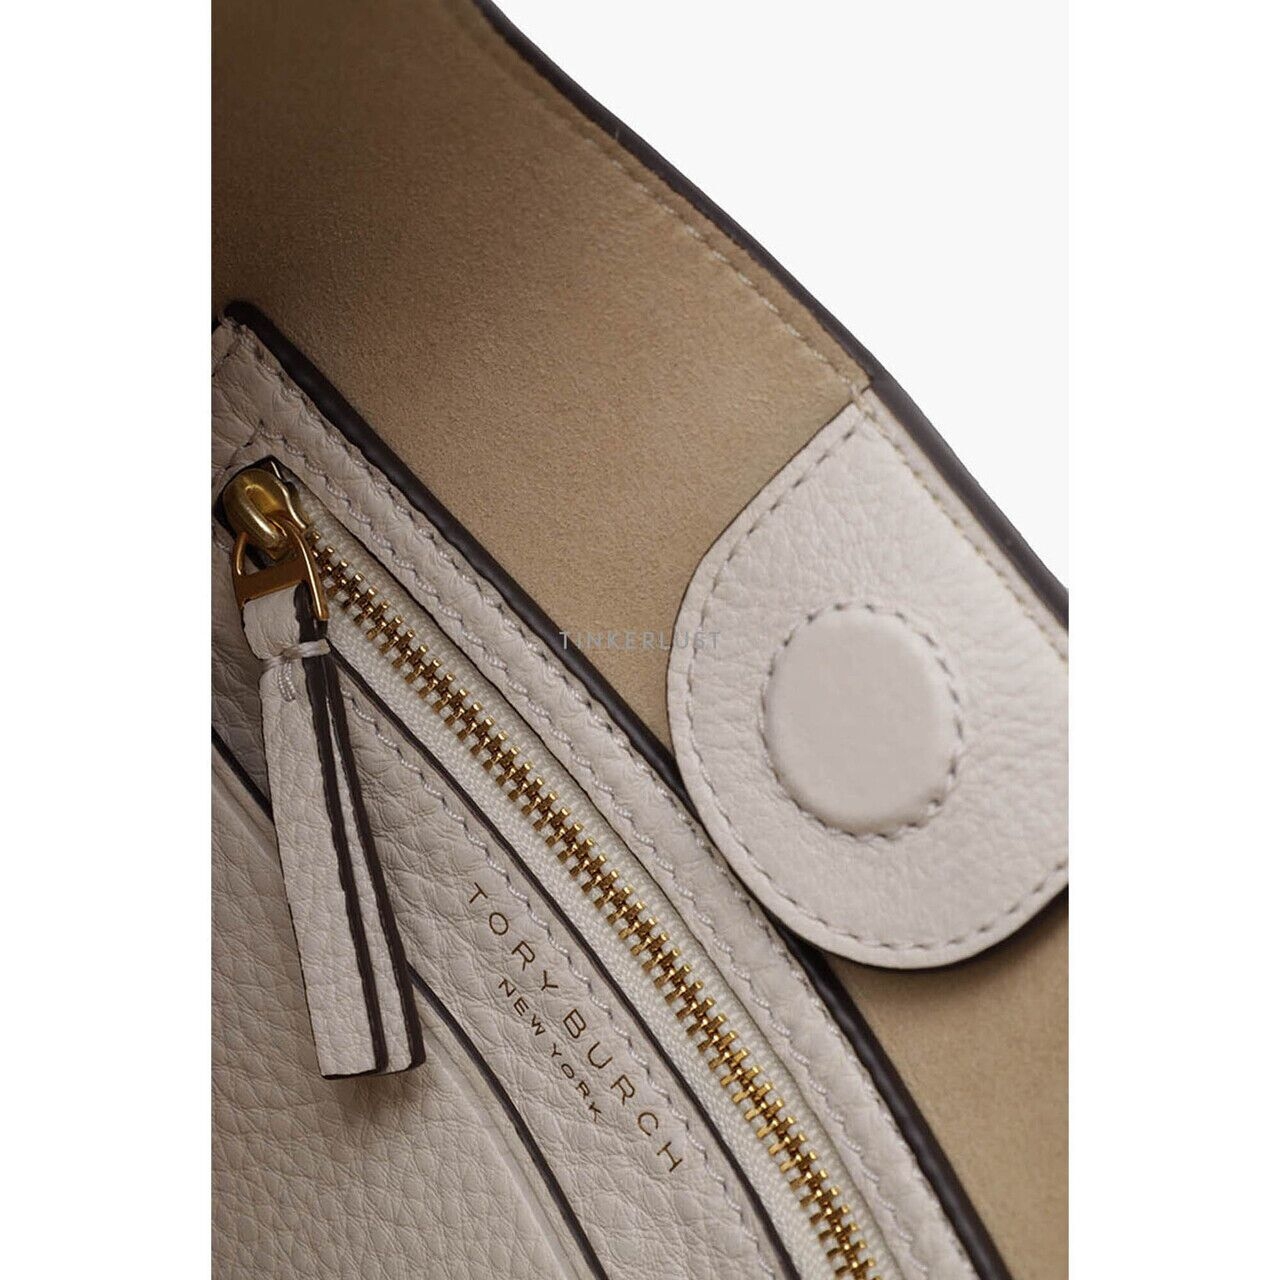 Tory Burch Small Miller Classic in New Ivory Shoulder Bag